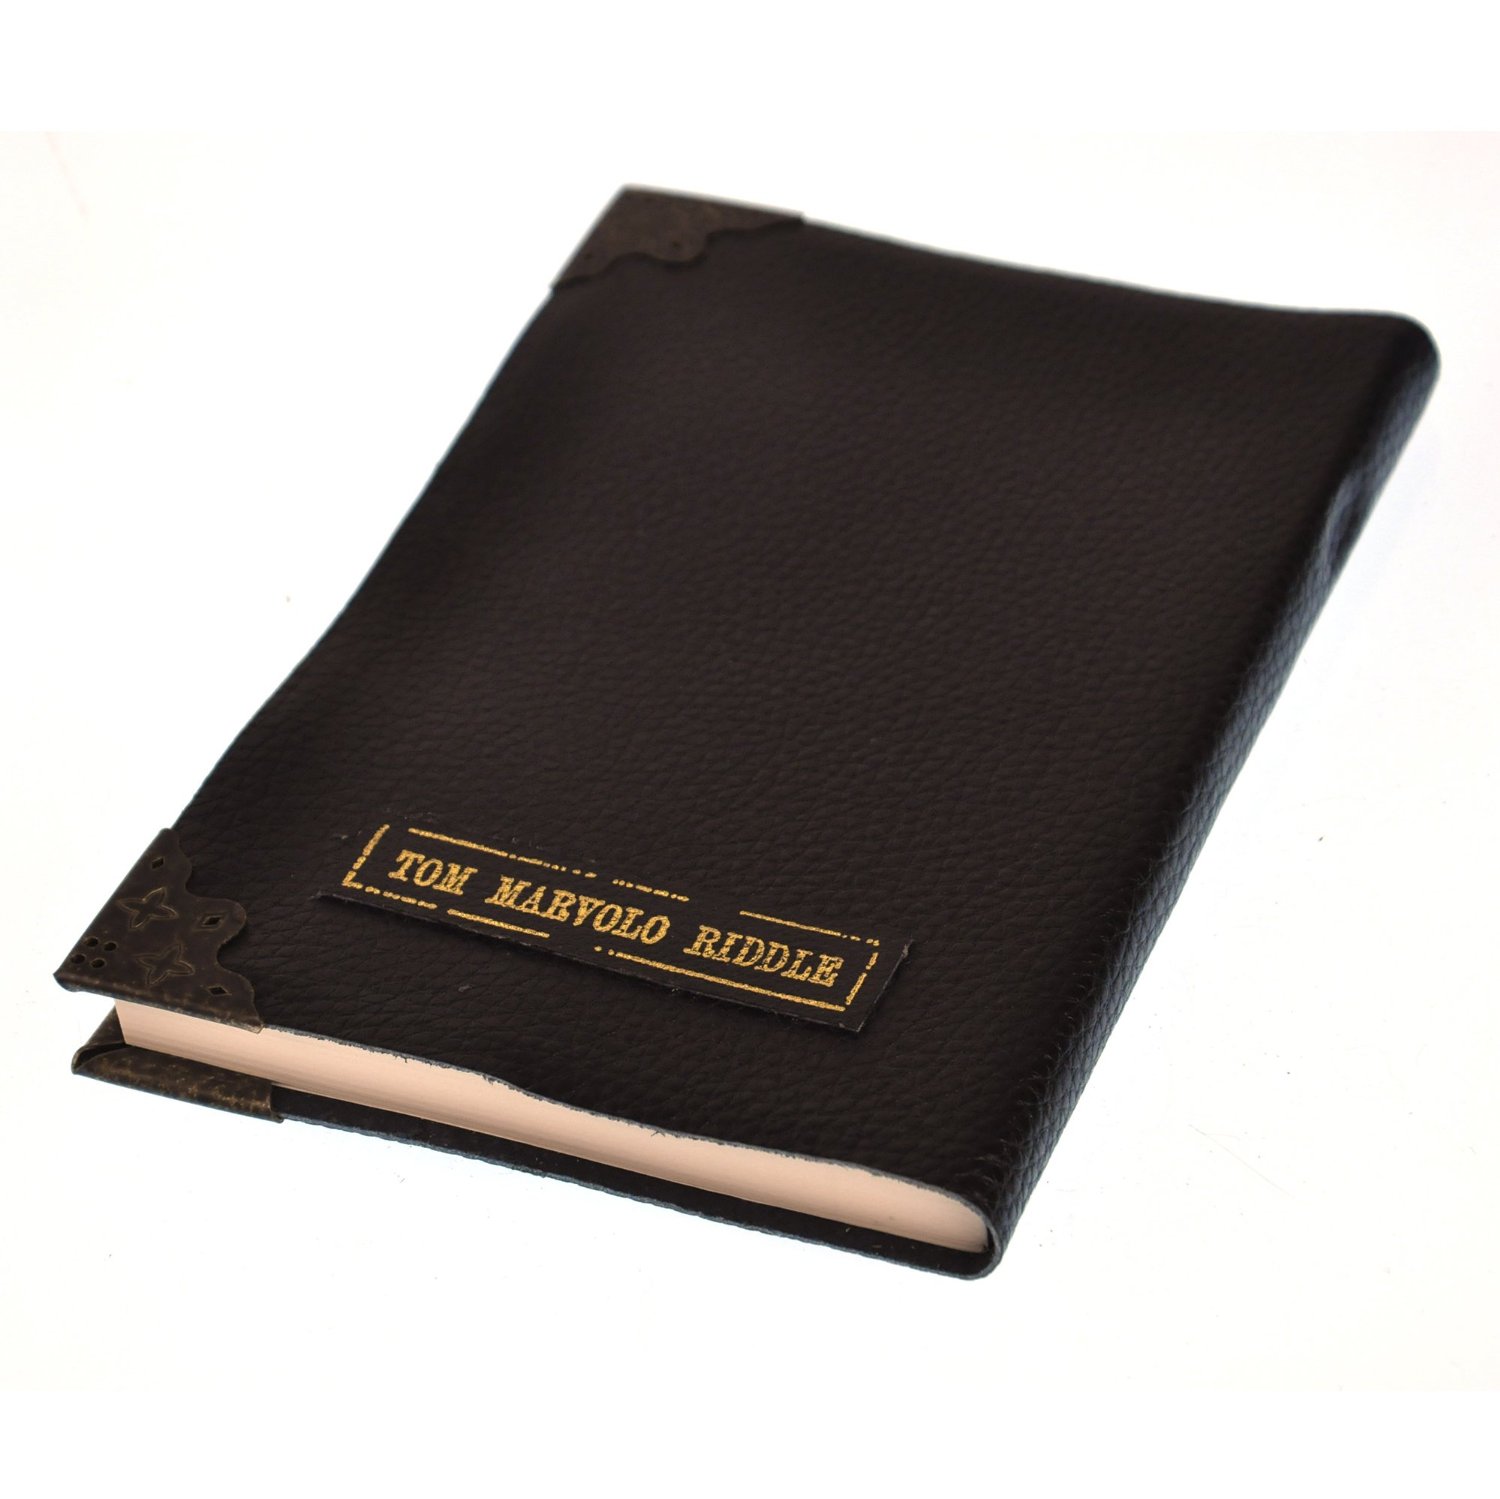 Tom Riddle's Diary - $29